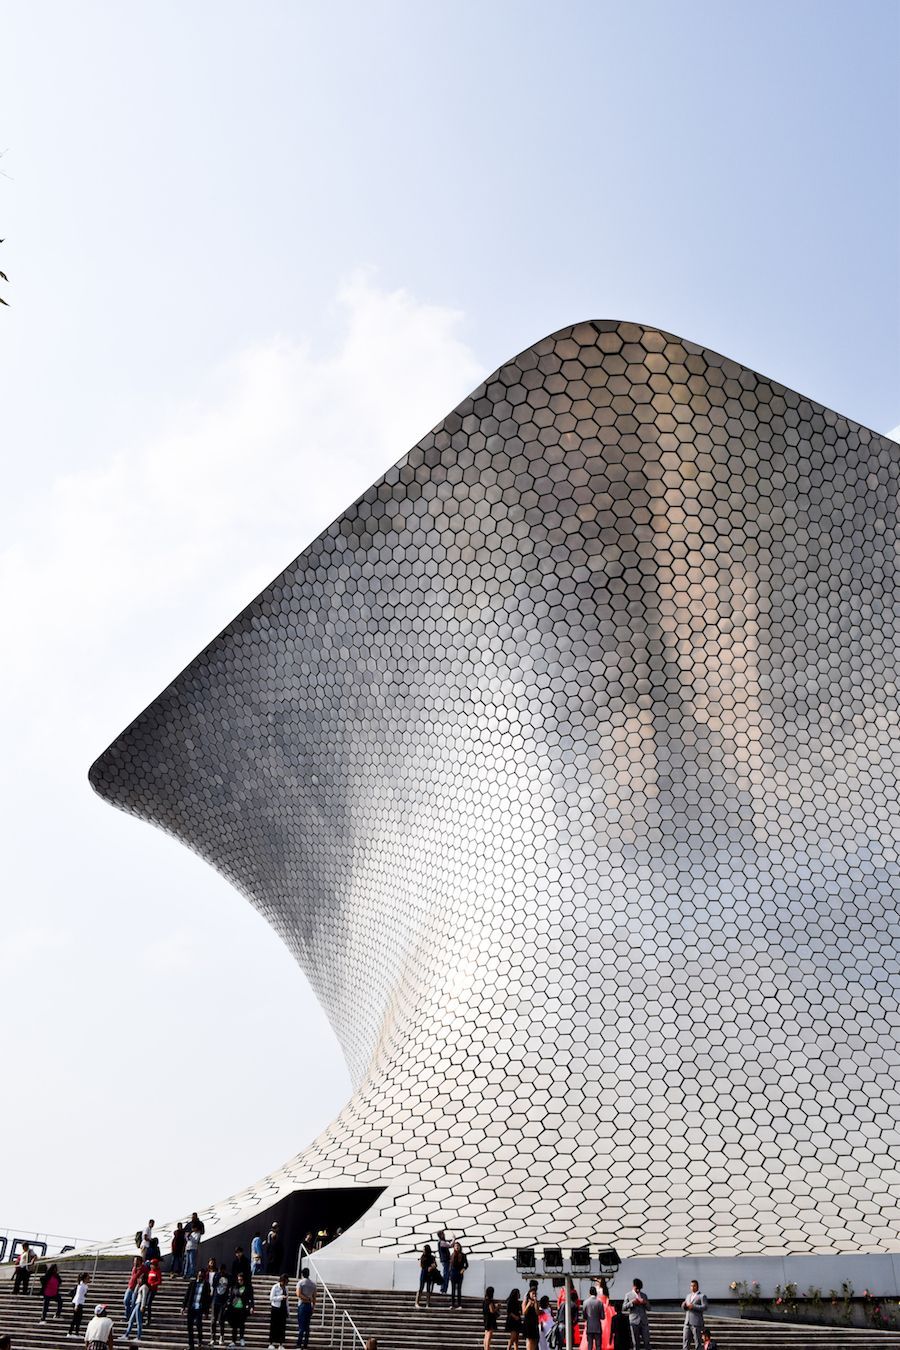 Best Art Museums in Mexico City - Museo Soumaya, Mexico City Culture, Mexico City Art, Mexico City Travel Guide